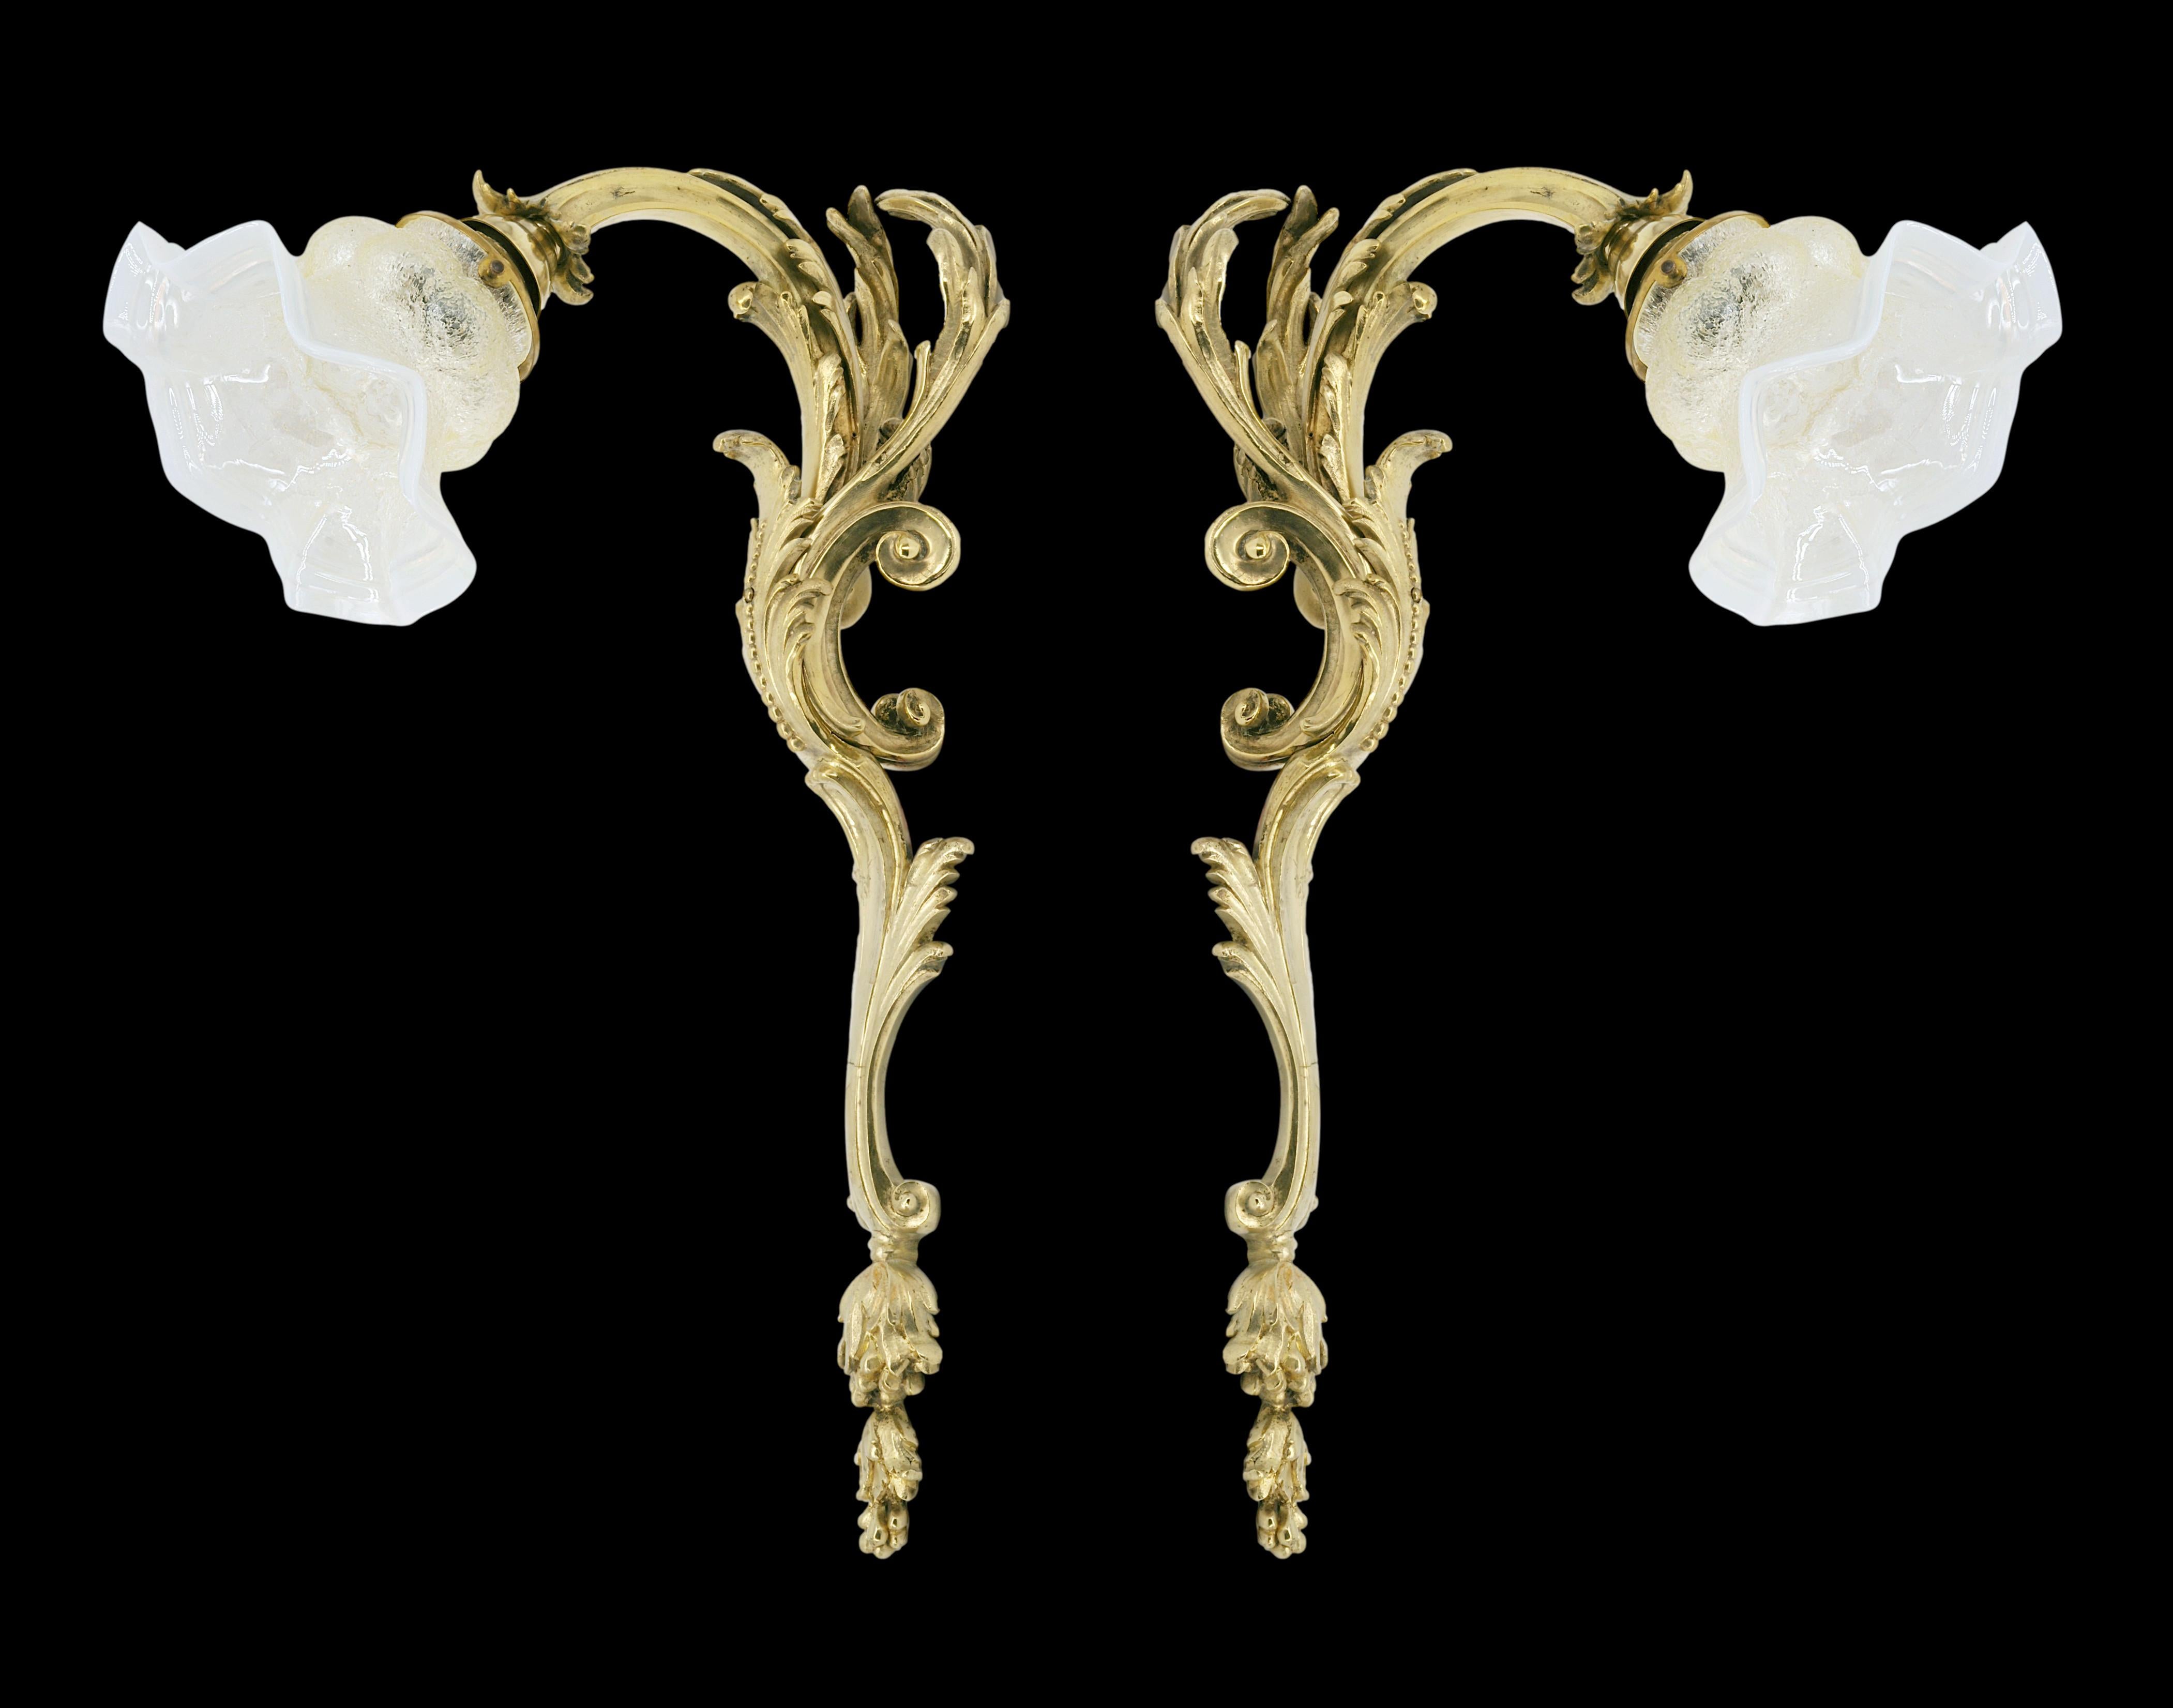 Large pair of French Napoleon III wall sconces, France, 1880-1890. Gilt bronze fixtures and opalescent granite glass shades. Height : 45cm (17.7